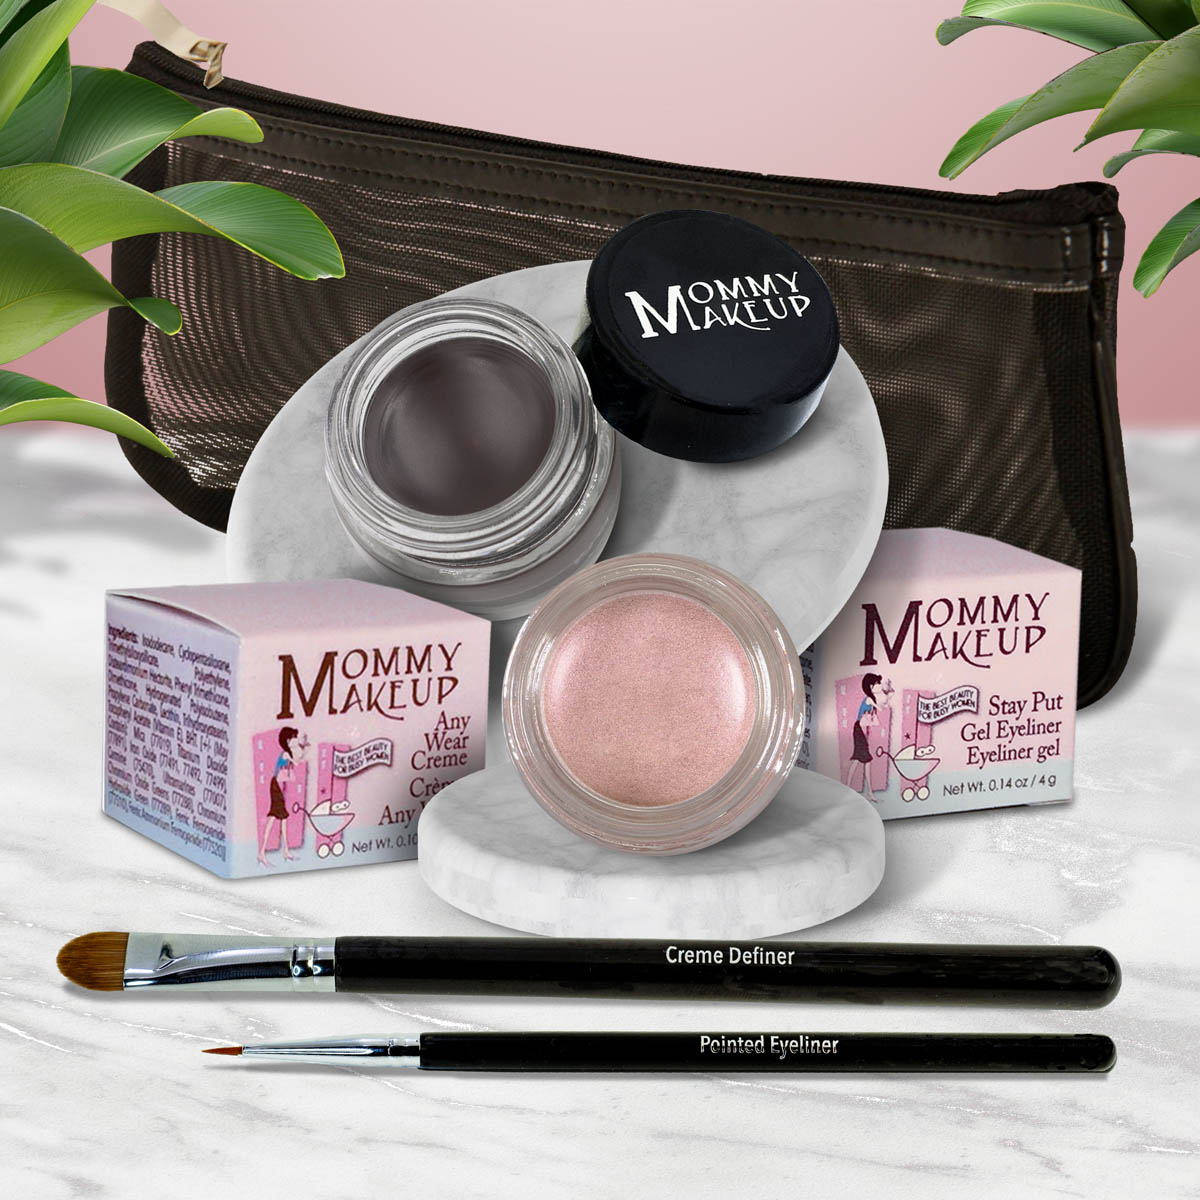 5 piece waterproof eye makeup set. Eyeliner, Eye shadow, brushes. Allergy tested, cruelty free. Made in USA. Pink Icing - A Pale Pearlized Pink and Chocolate Kiss - Deep brown/black